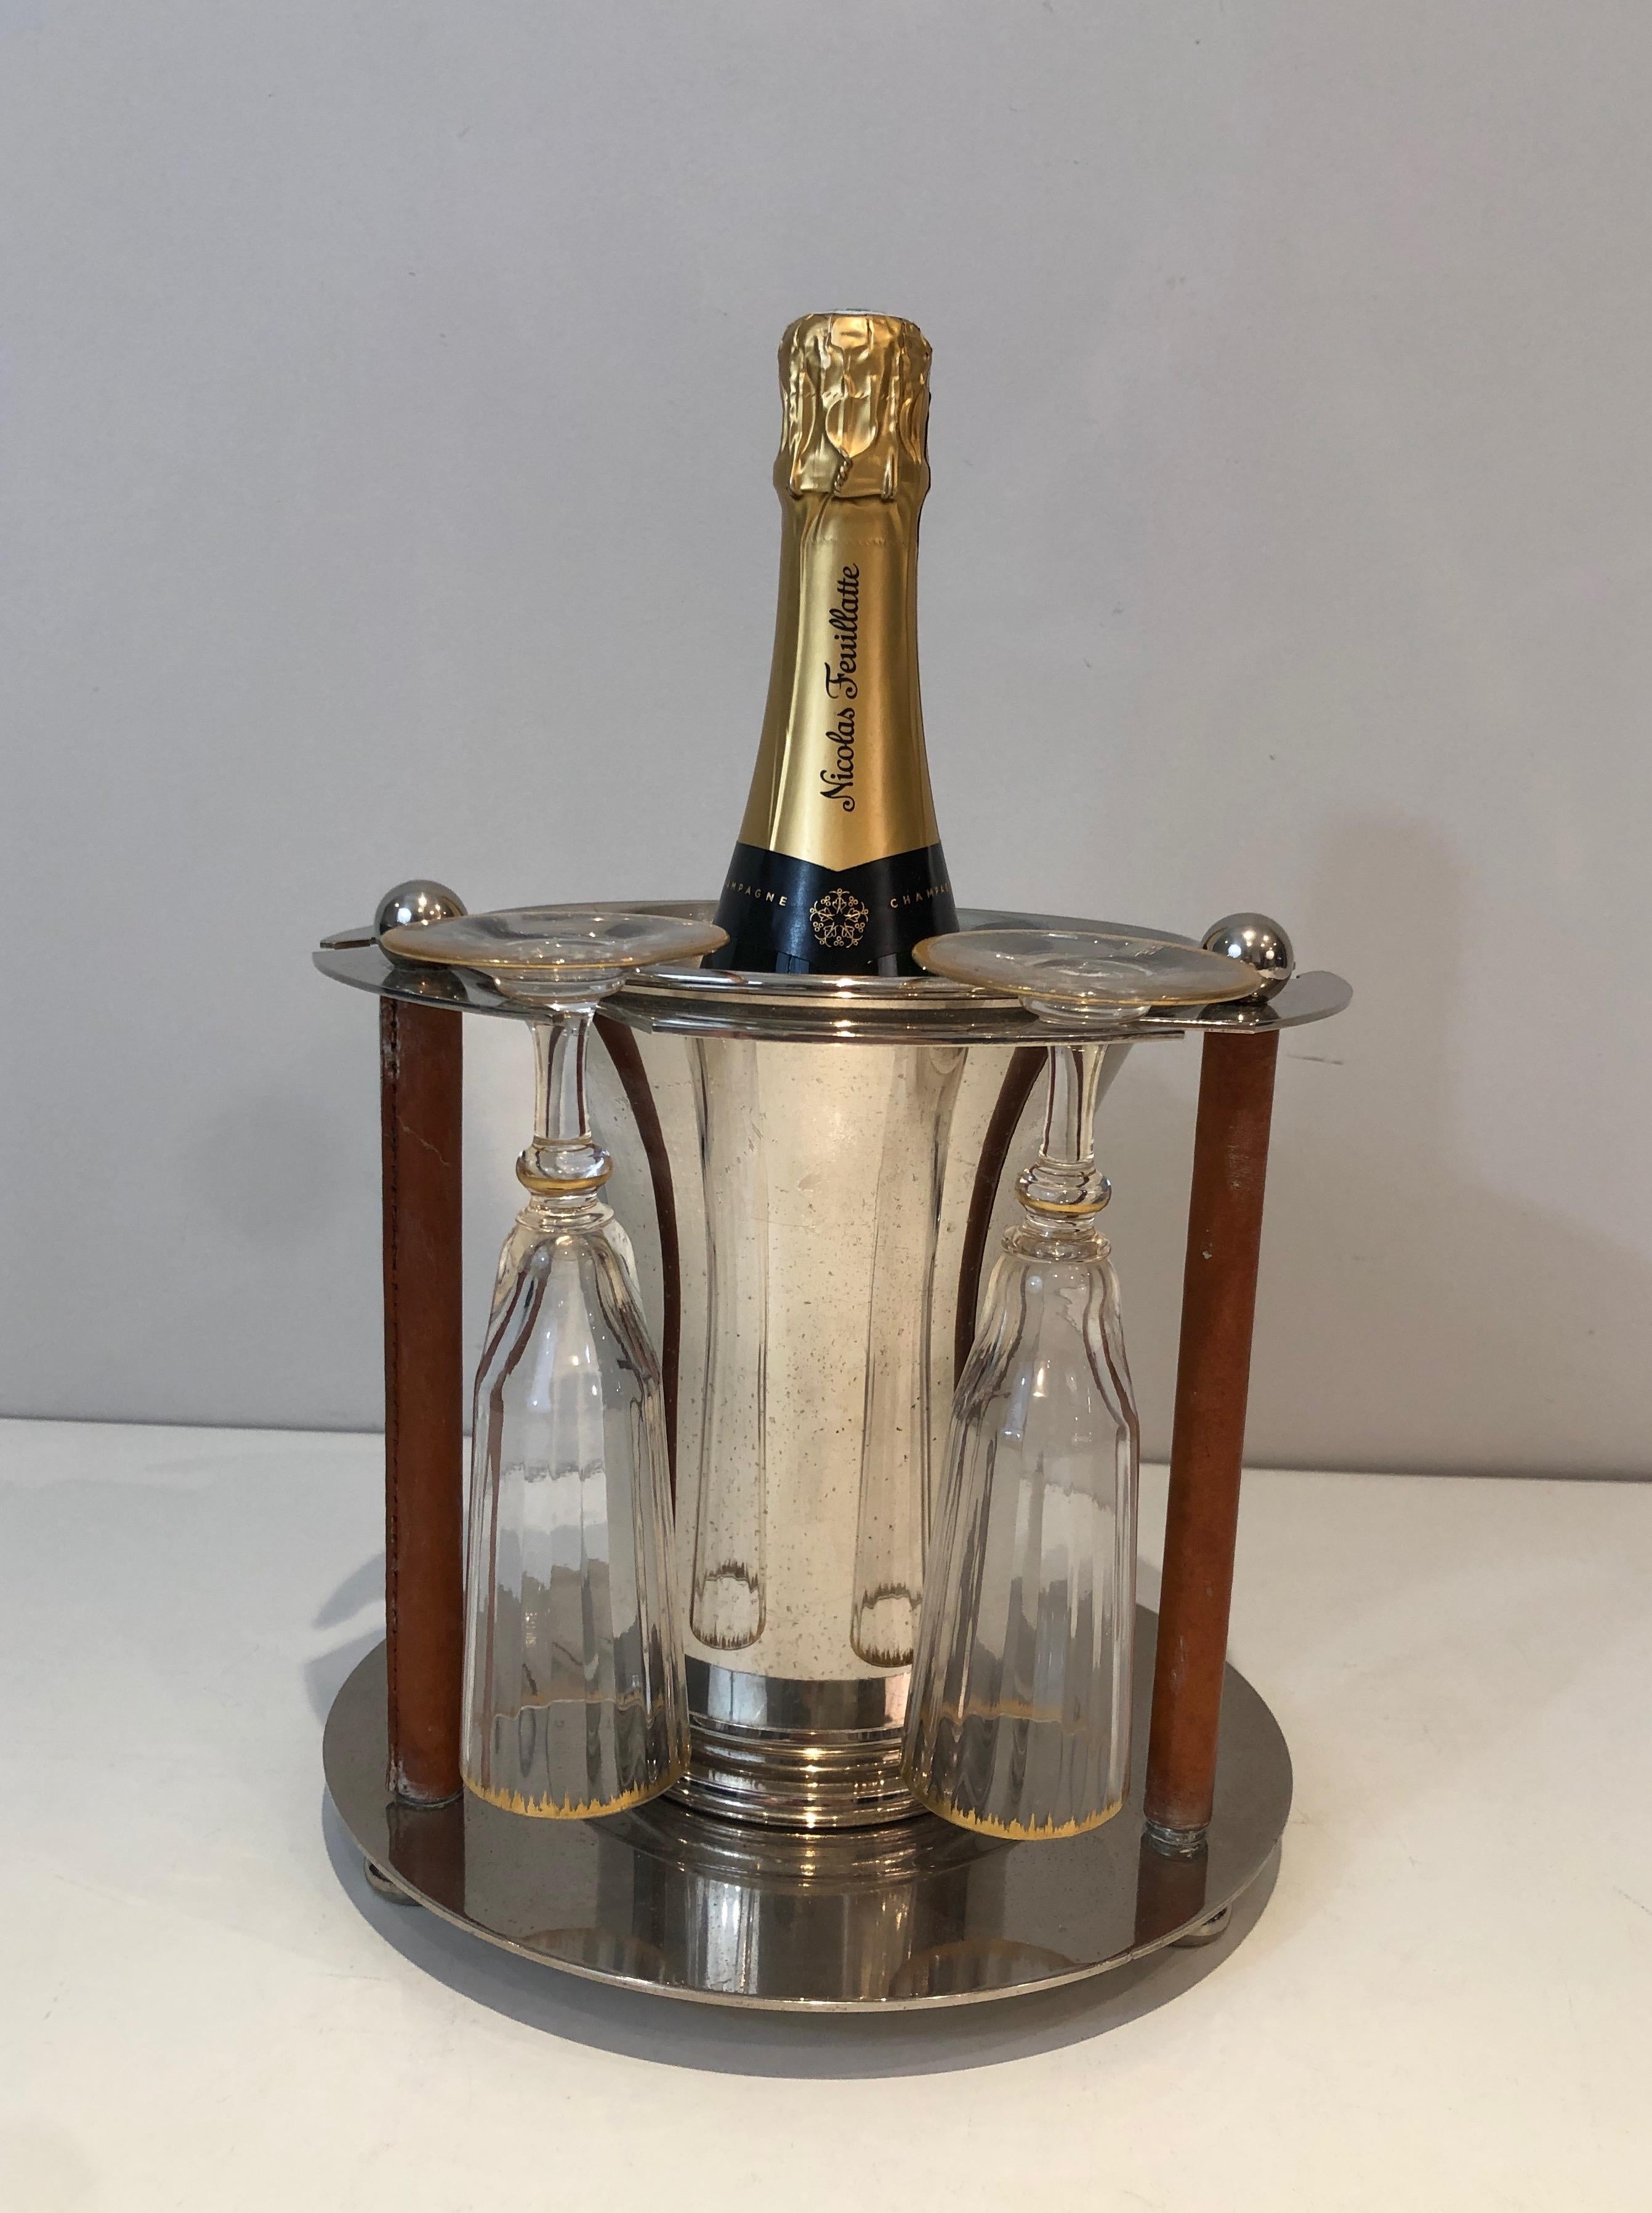 This rare champagne bucket with flutes holder is made of silver plated and leather. This is a French work. Circa 1970. A pair is available.